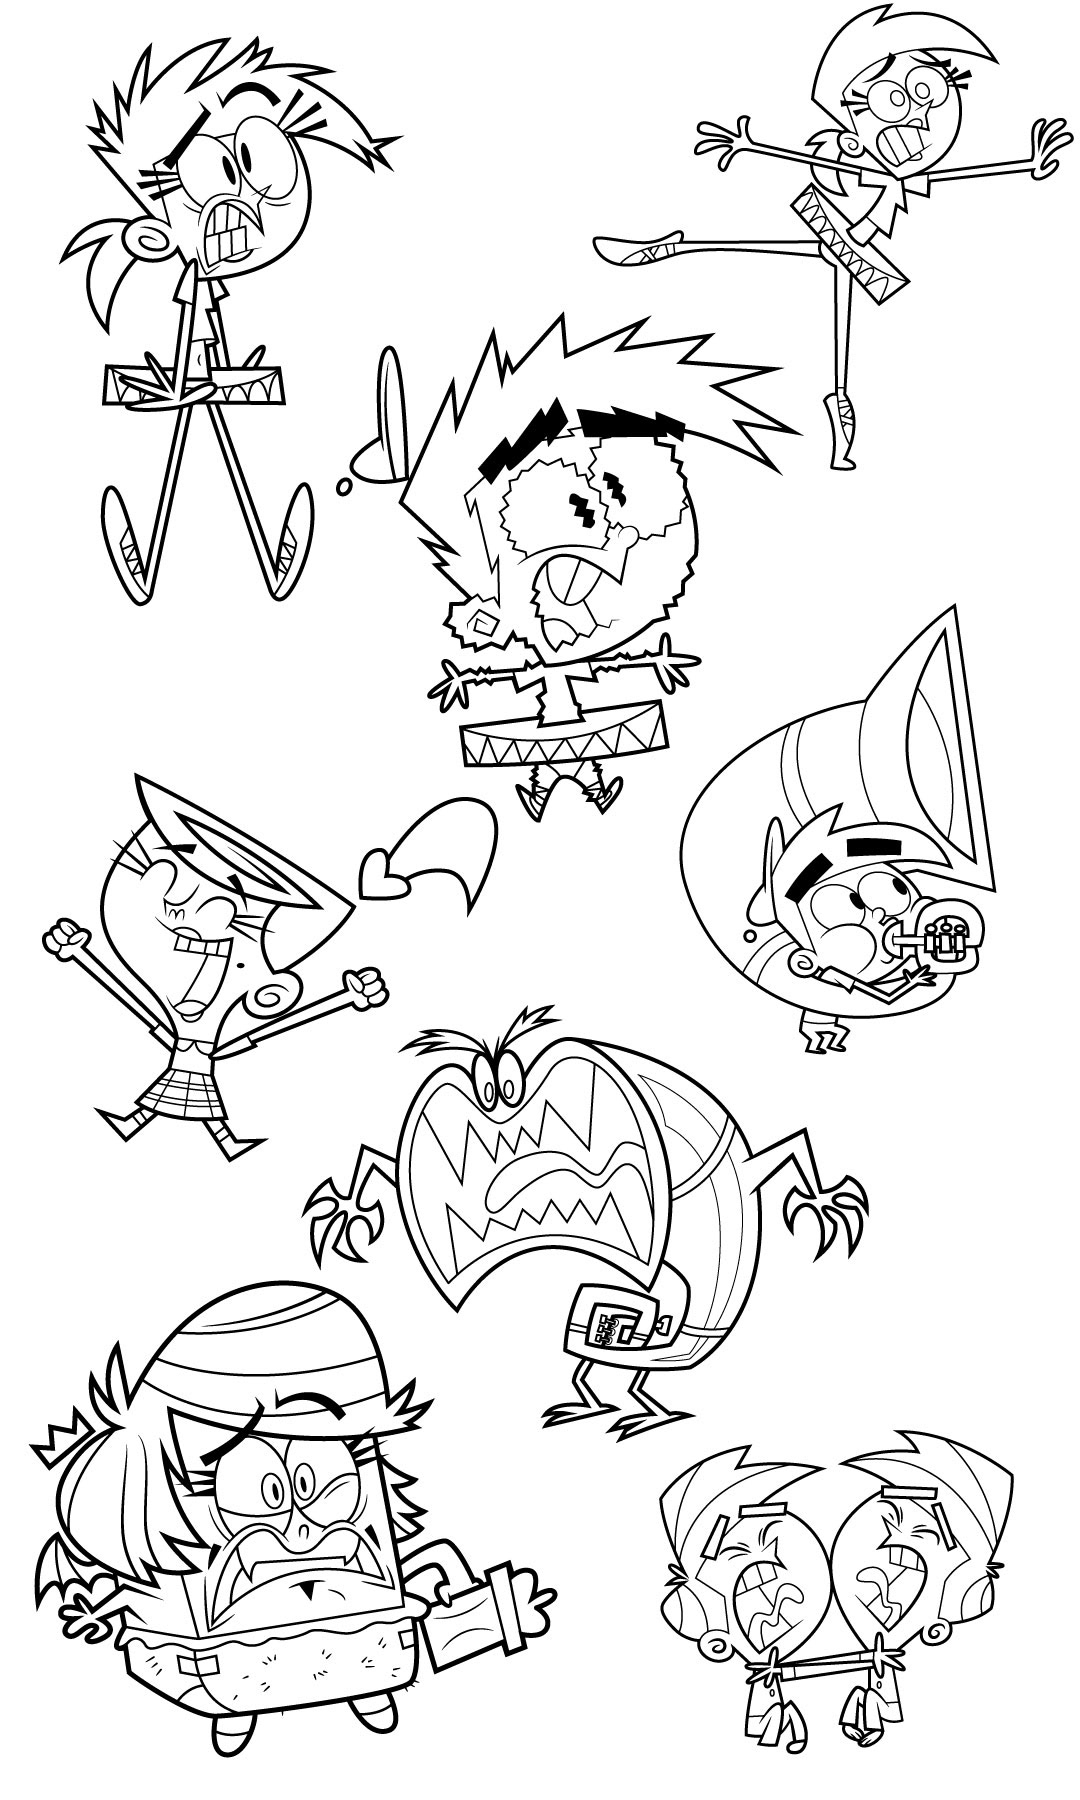 Clean up samples fairly odd parents